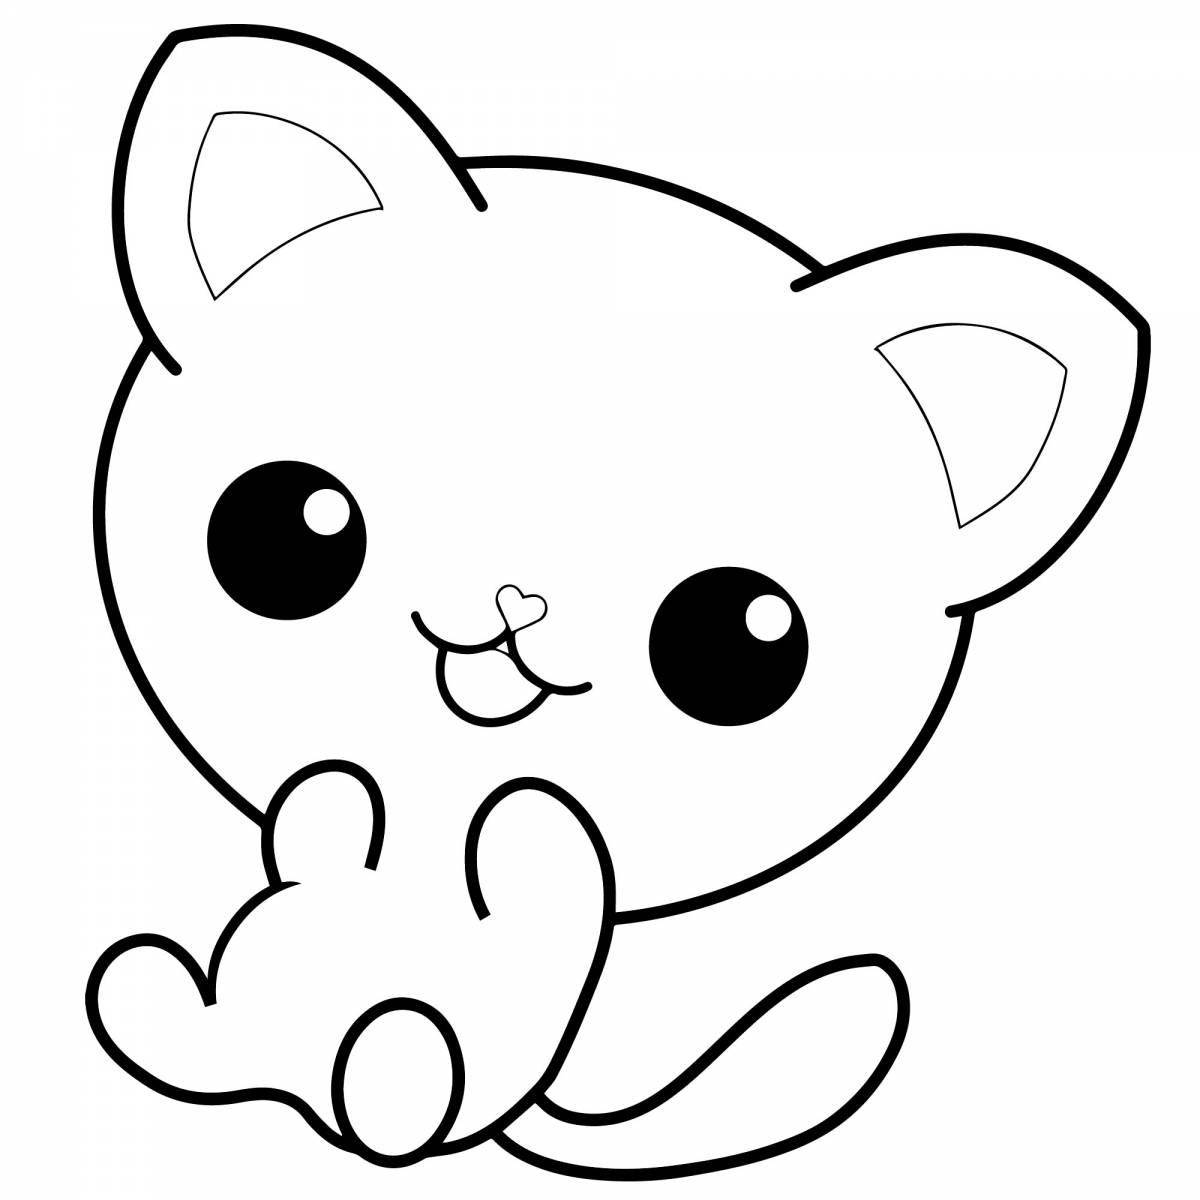 Coloring page freaky ginger cat